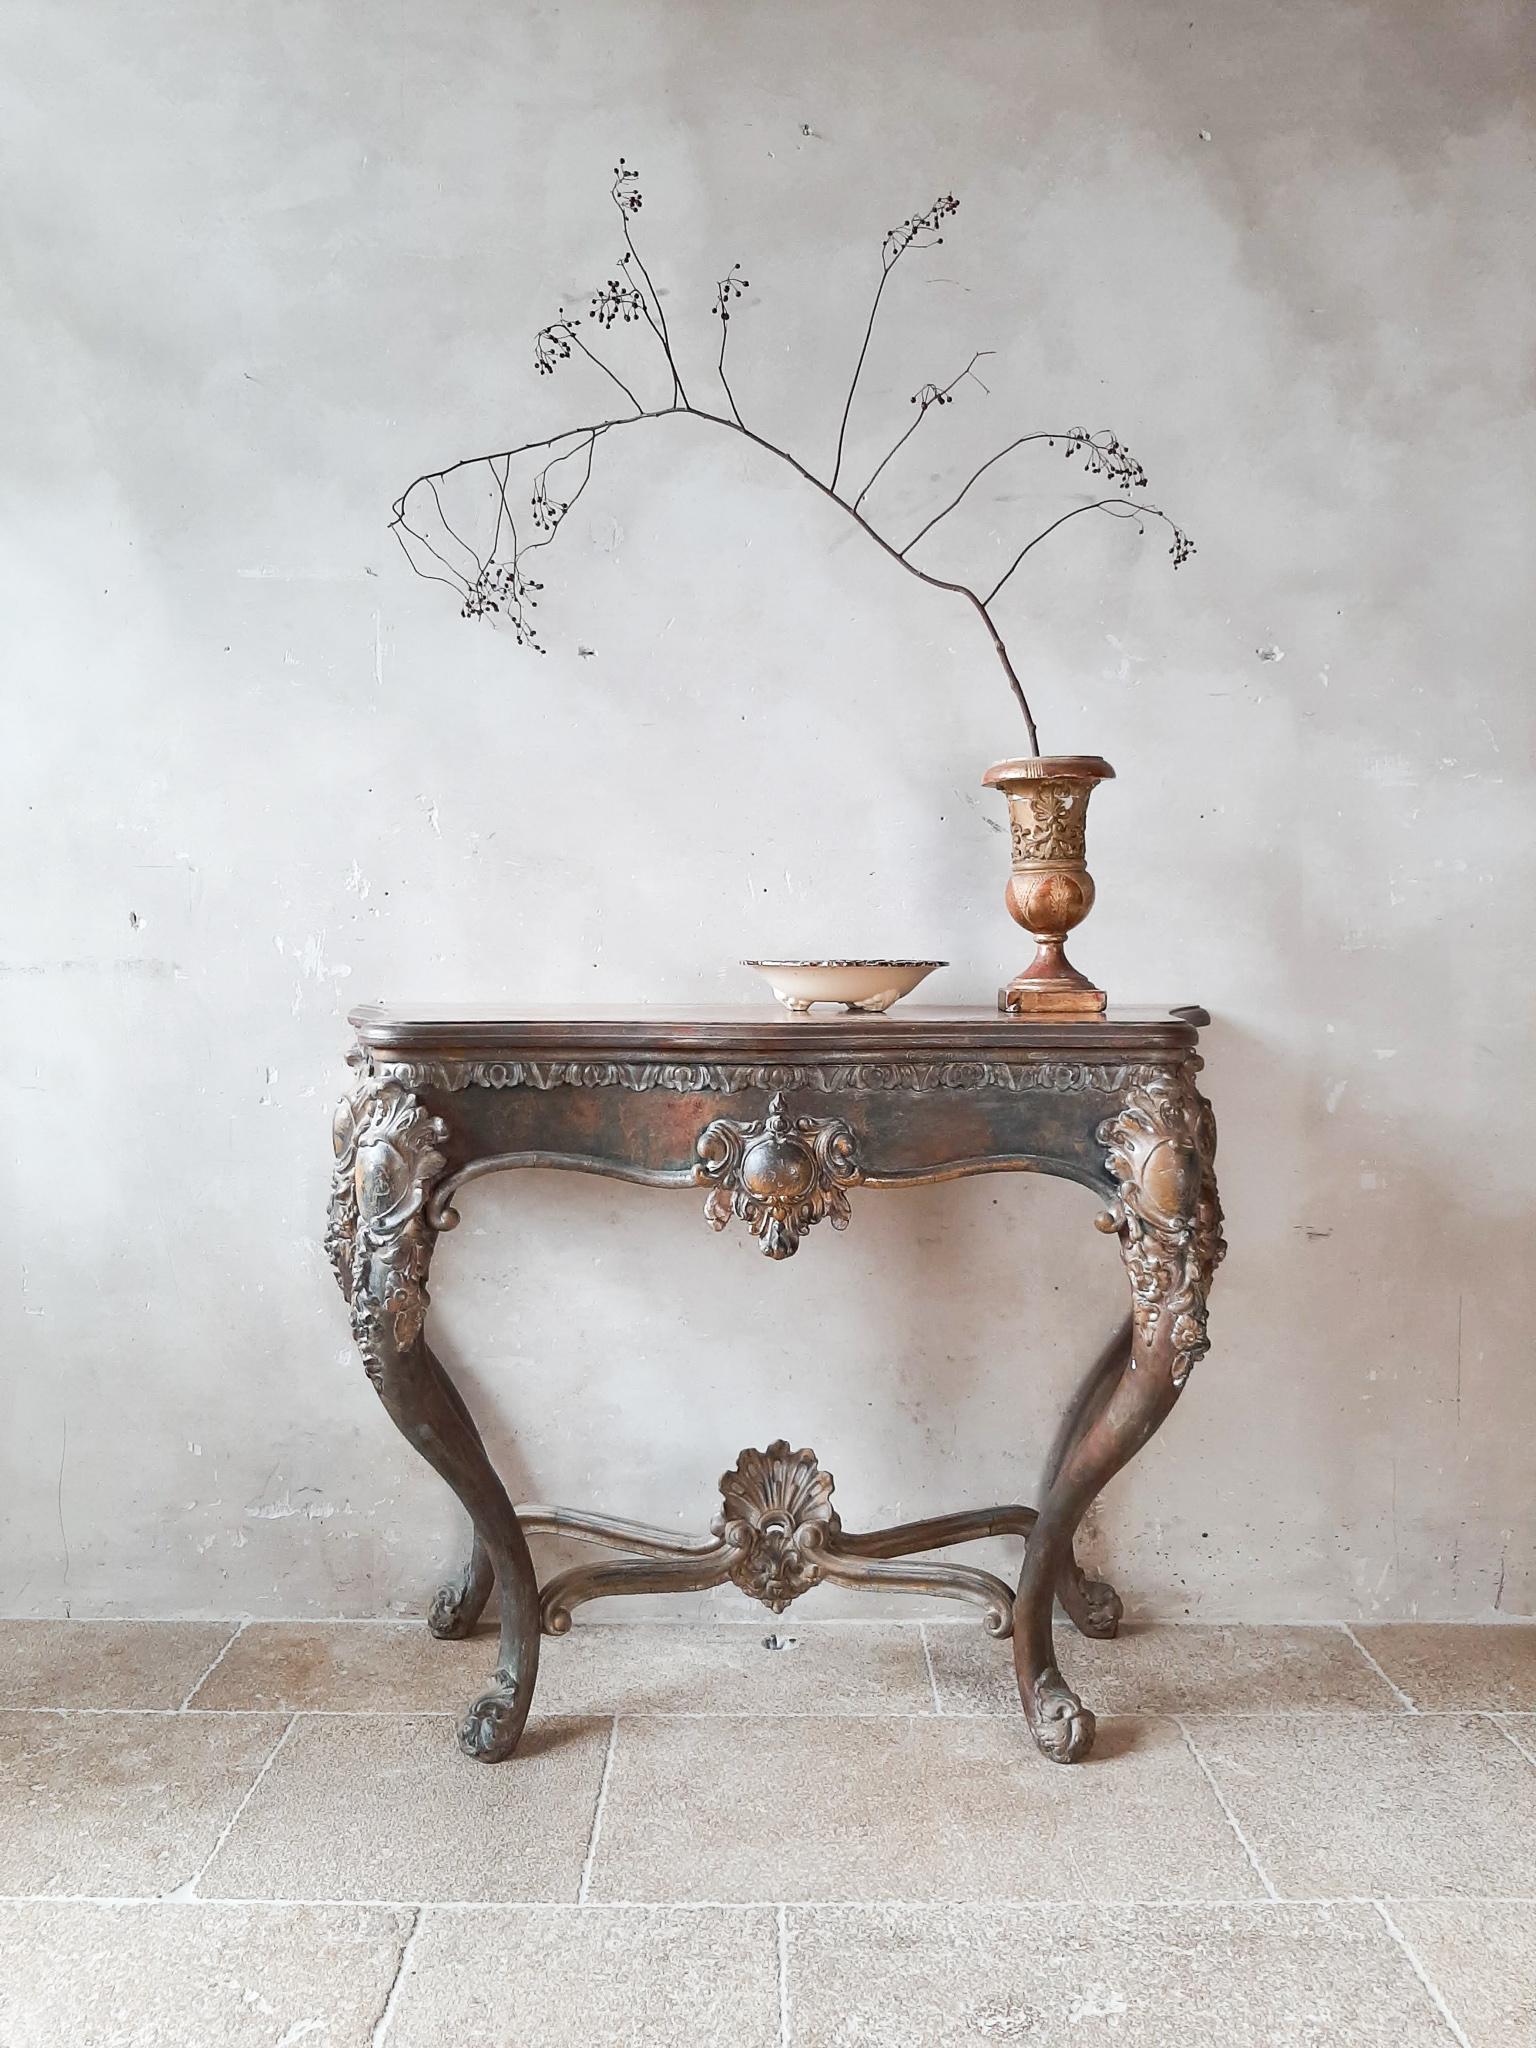 Antique console table with special patina in gold / cognac tones mixed with petrol colors. Neo-classic style, late 19th century.

Measures: height 90 cm x width 121 cm x depth 53 cm.